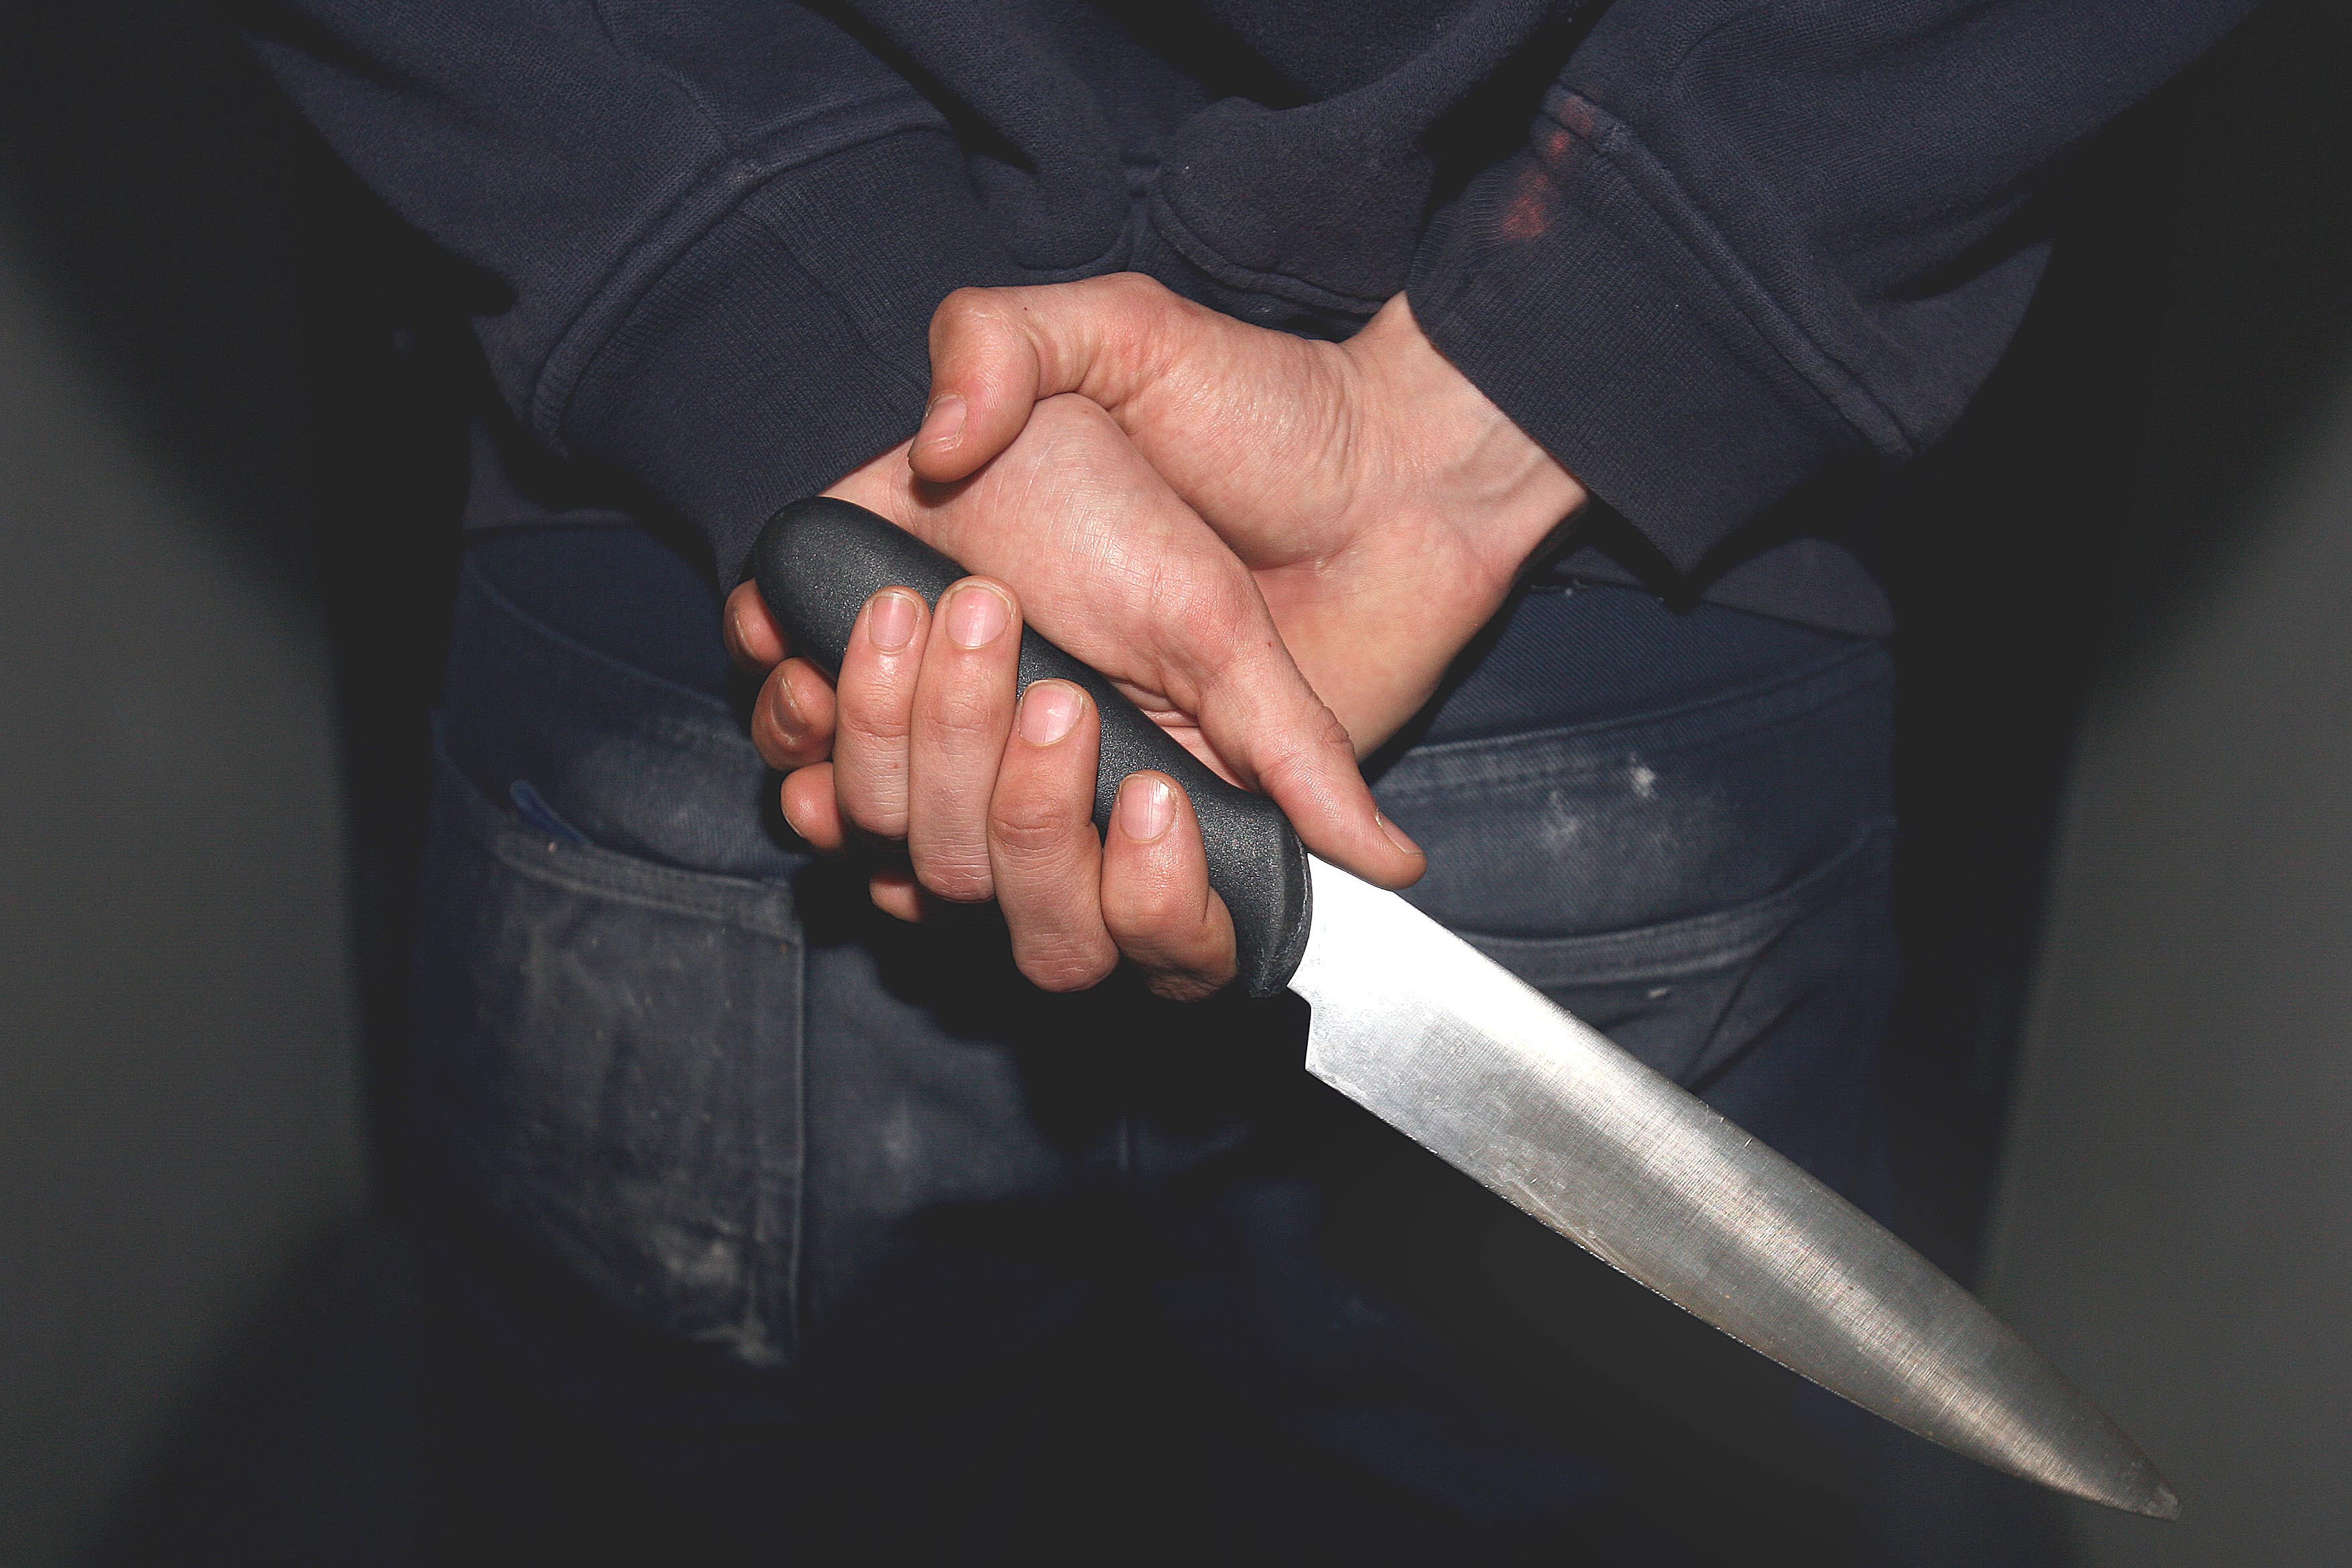 Knife Crime Prevention Orders were handed to people police believed to be carrying knives, in a pilot scheme (PA)